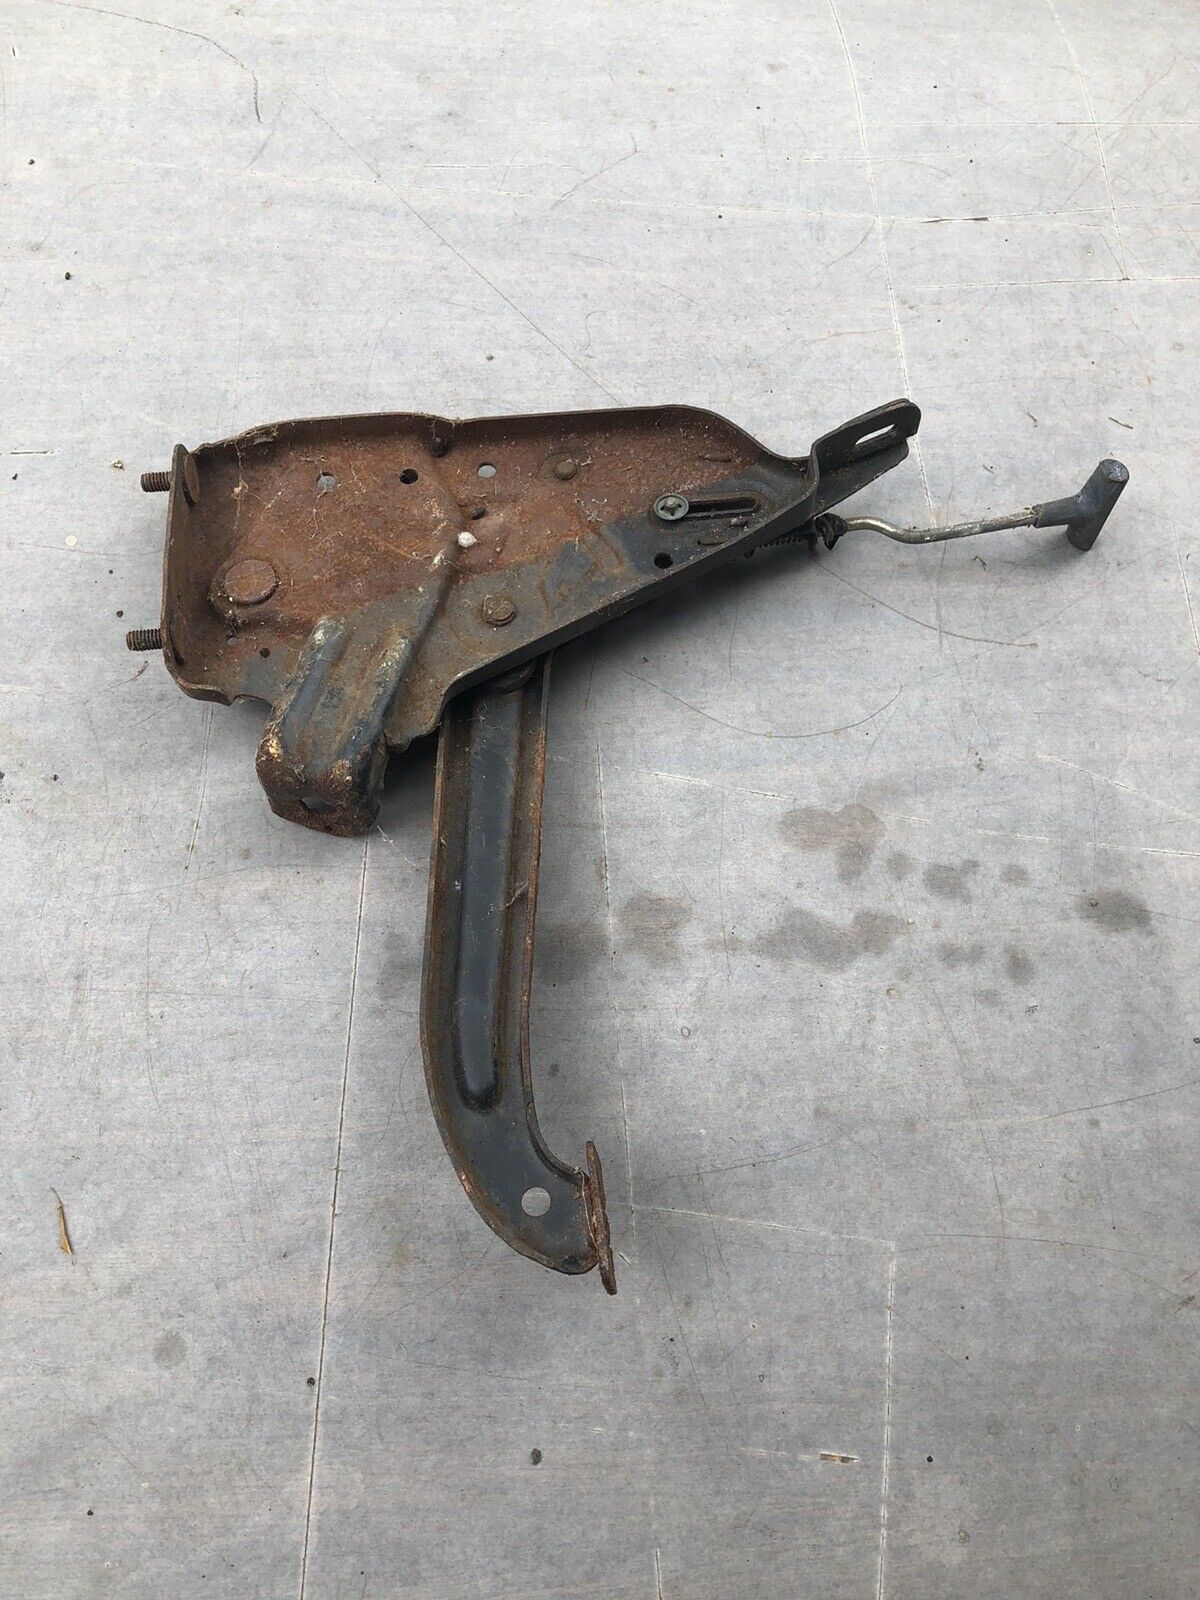 AMC  AMX 1968 ONLY interior EMERGENCY BRAKE assembly Pedal .Bracket, and all